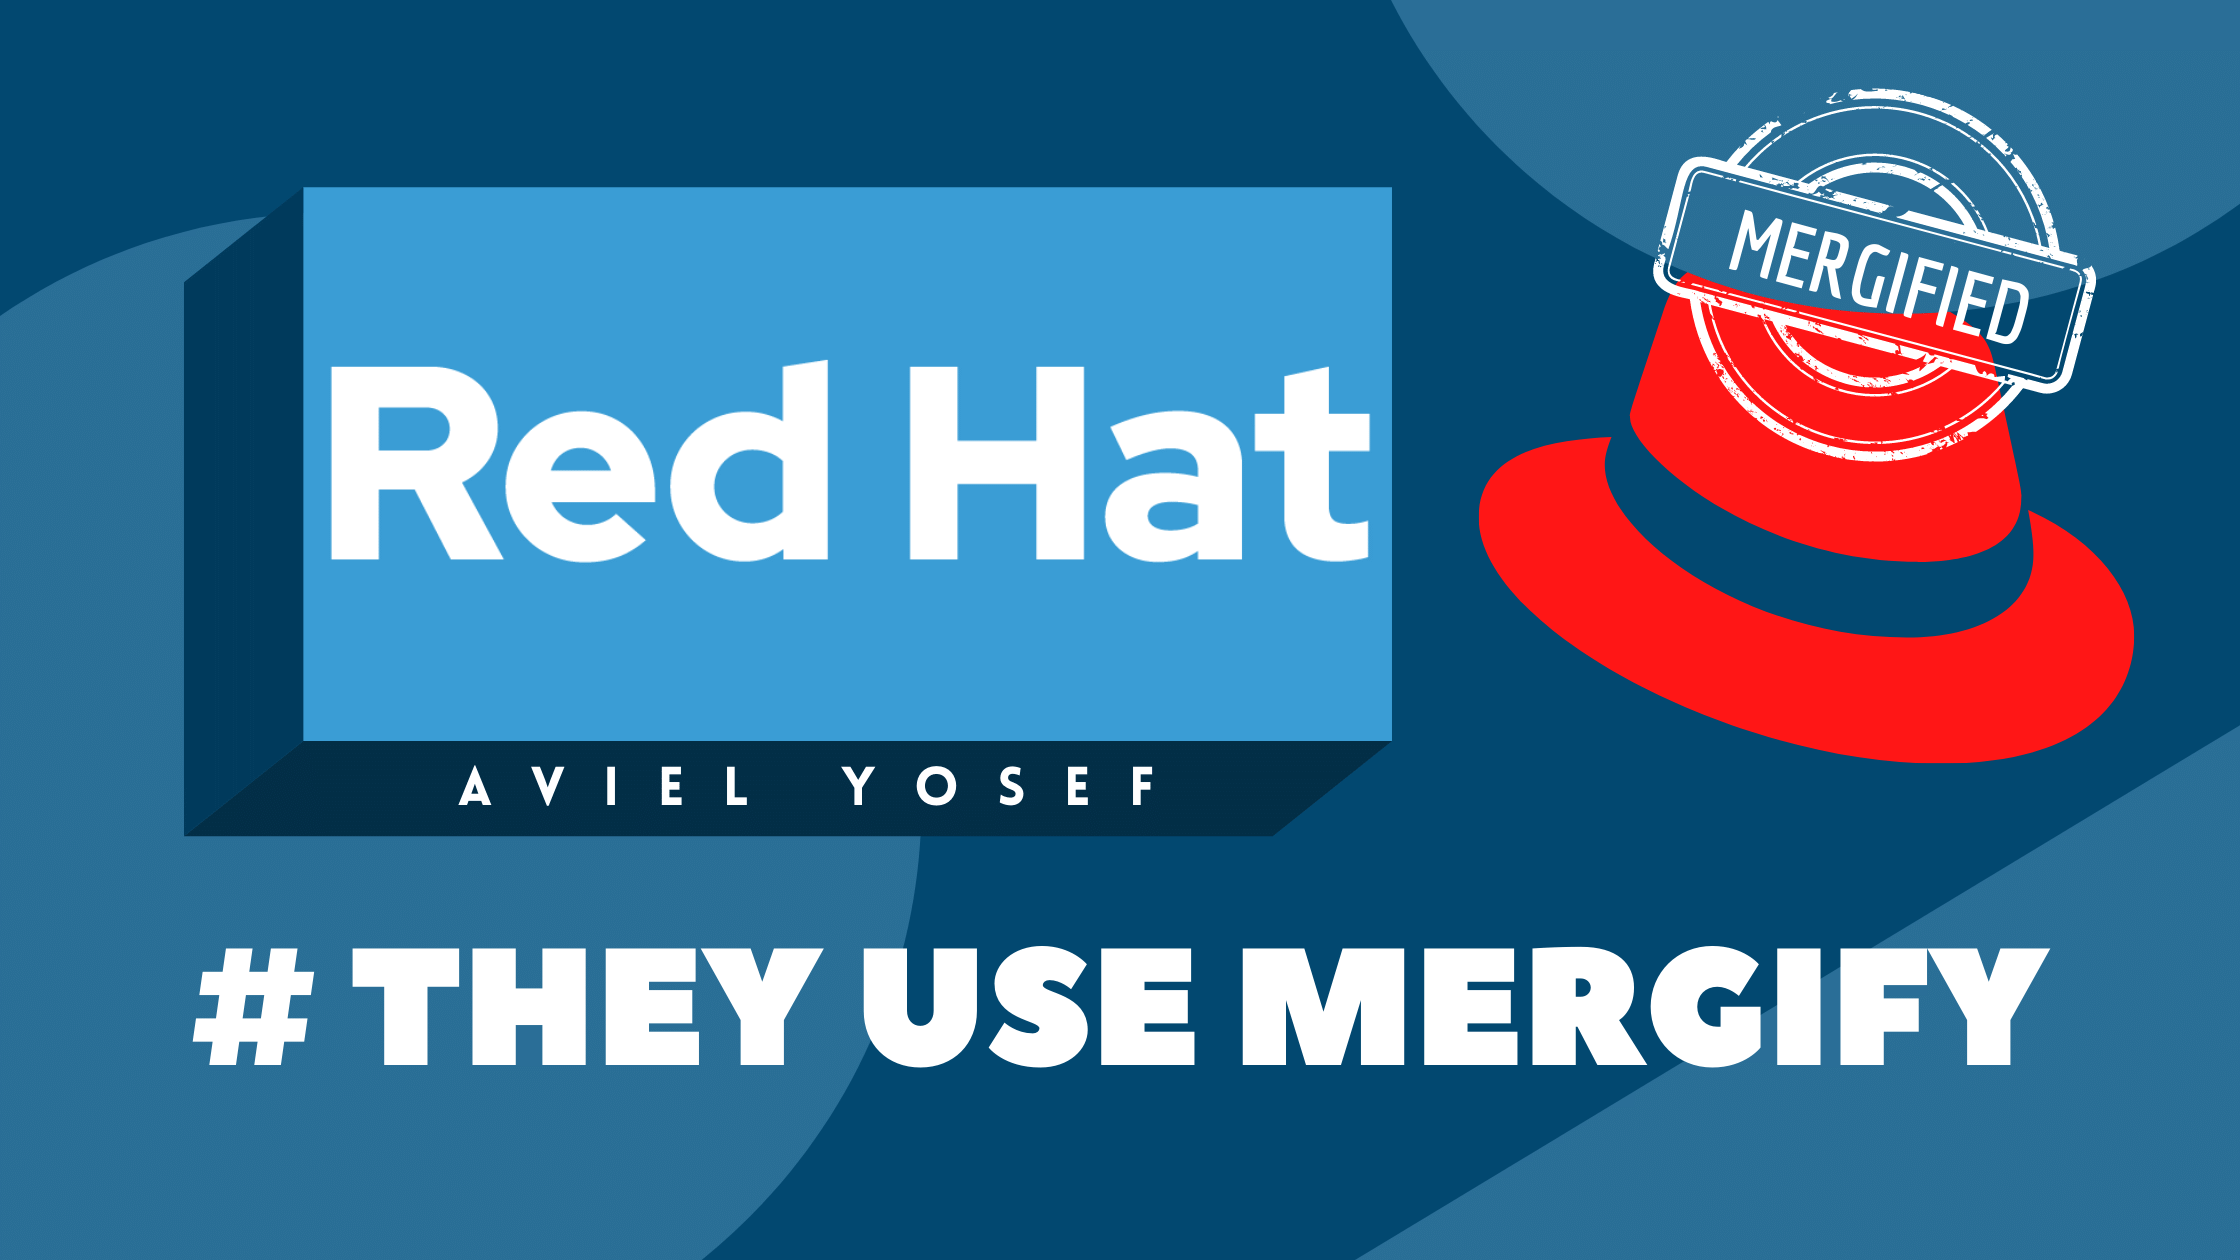 They use Mergify: Red Hat Hybrid Cloud Console